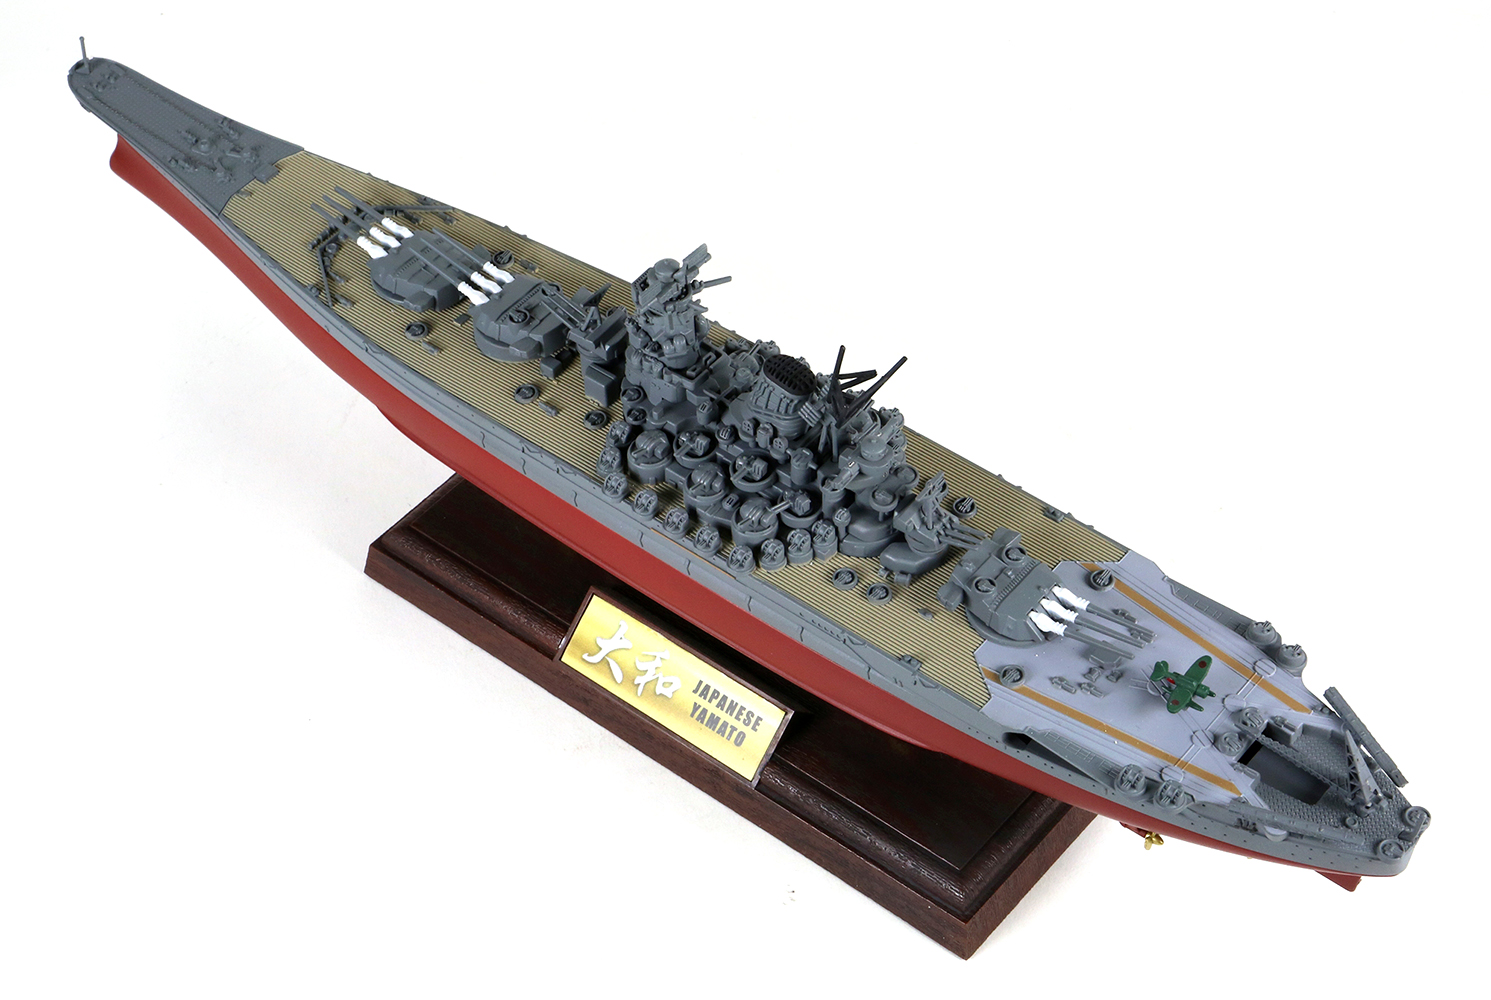 My Forces of Valor 1:700 diecast warship